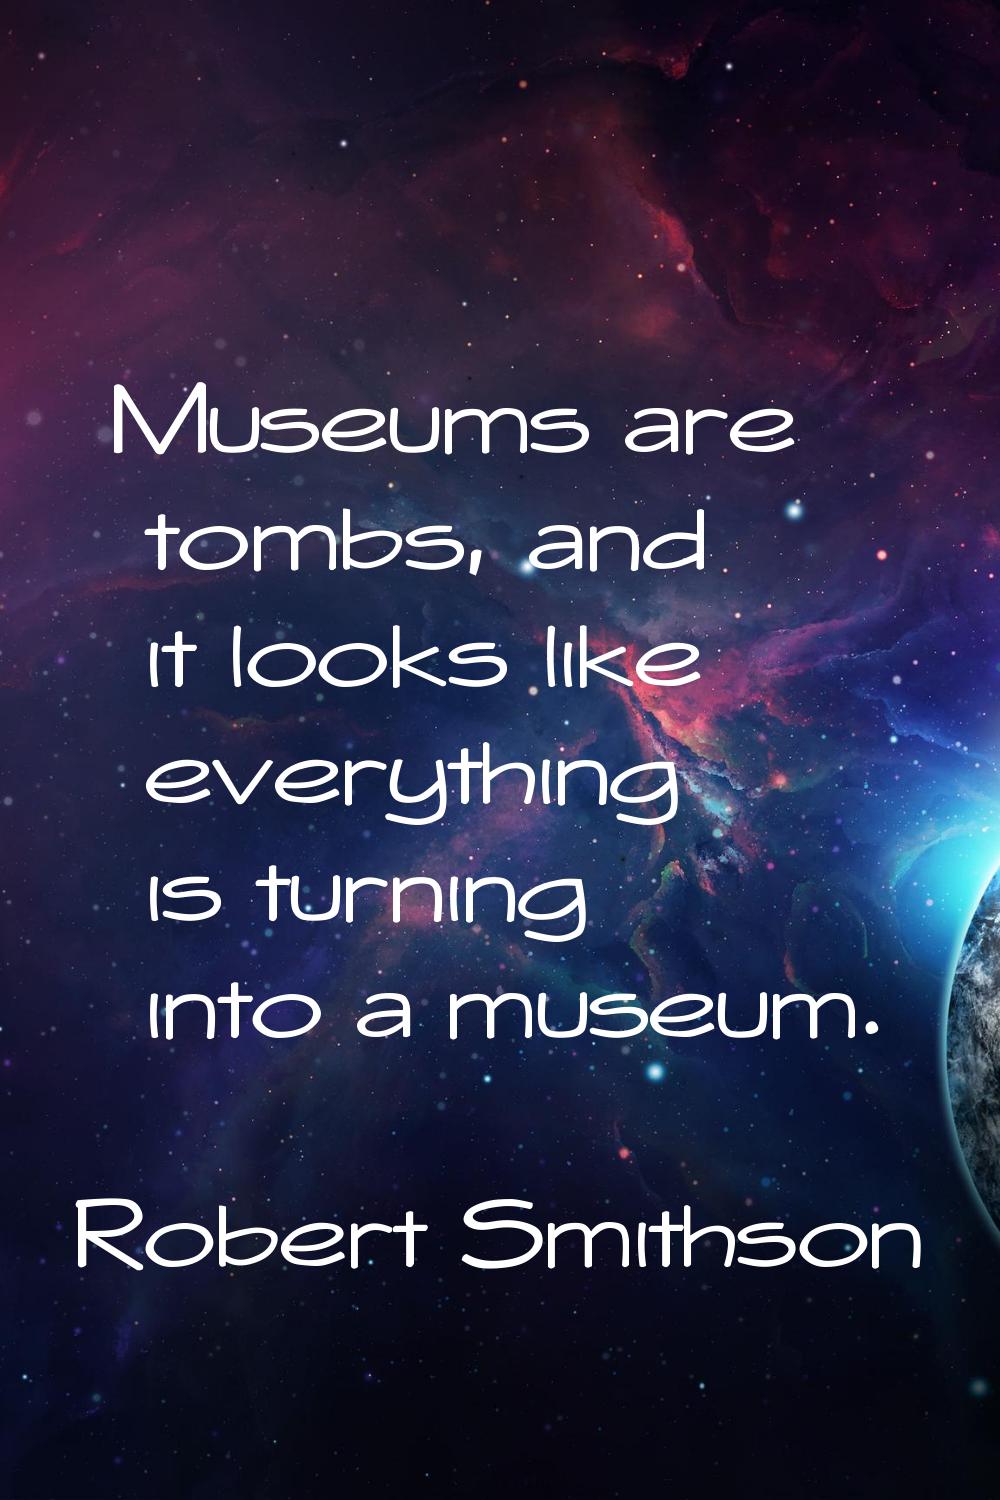 Museums are tombs, and it looks like everything is turning into a museum.